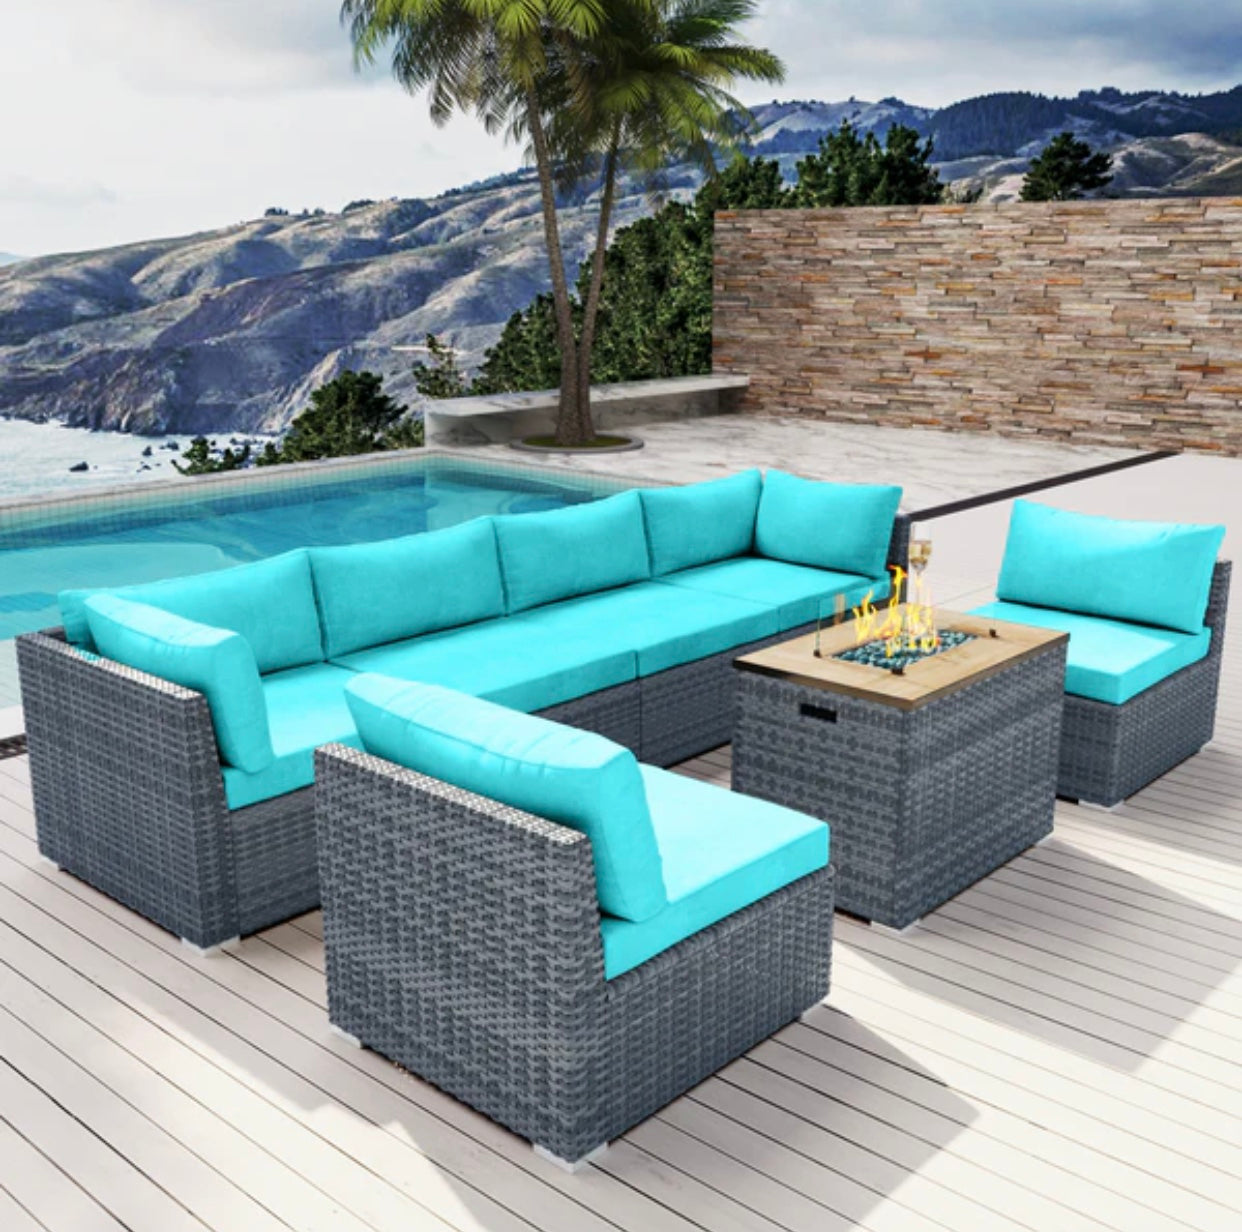 Blue Turquoise 7 Seven piece Outdoor Patio Furniture with Propane Fire Pit Gray Wicker Santa Monica Beach